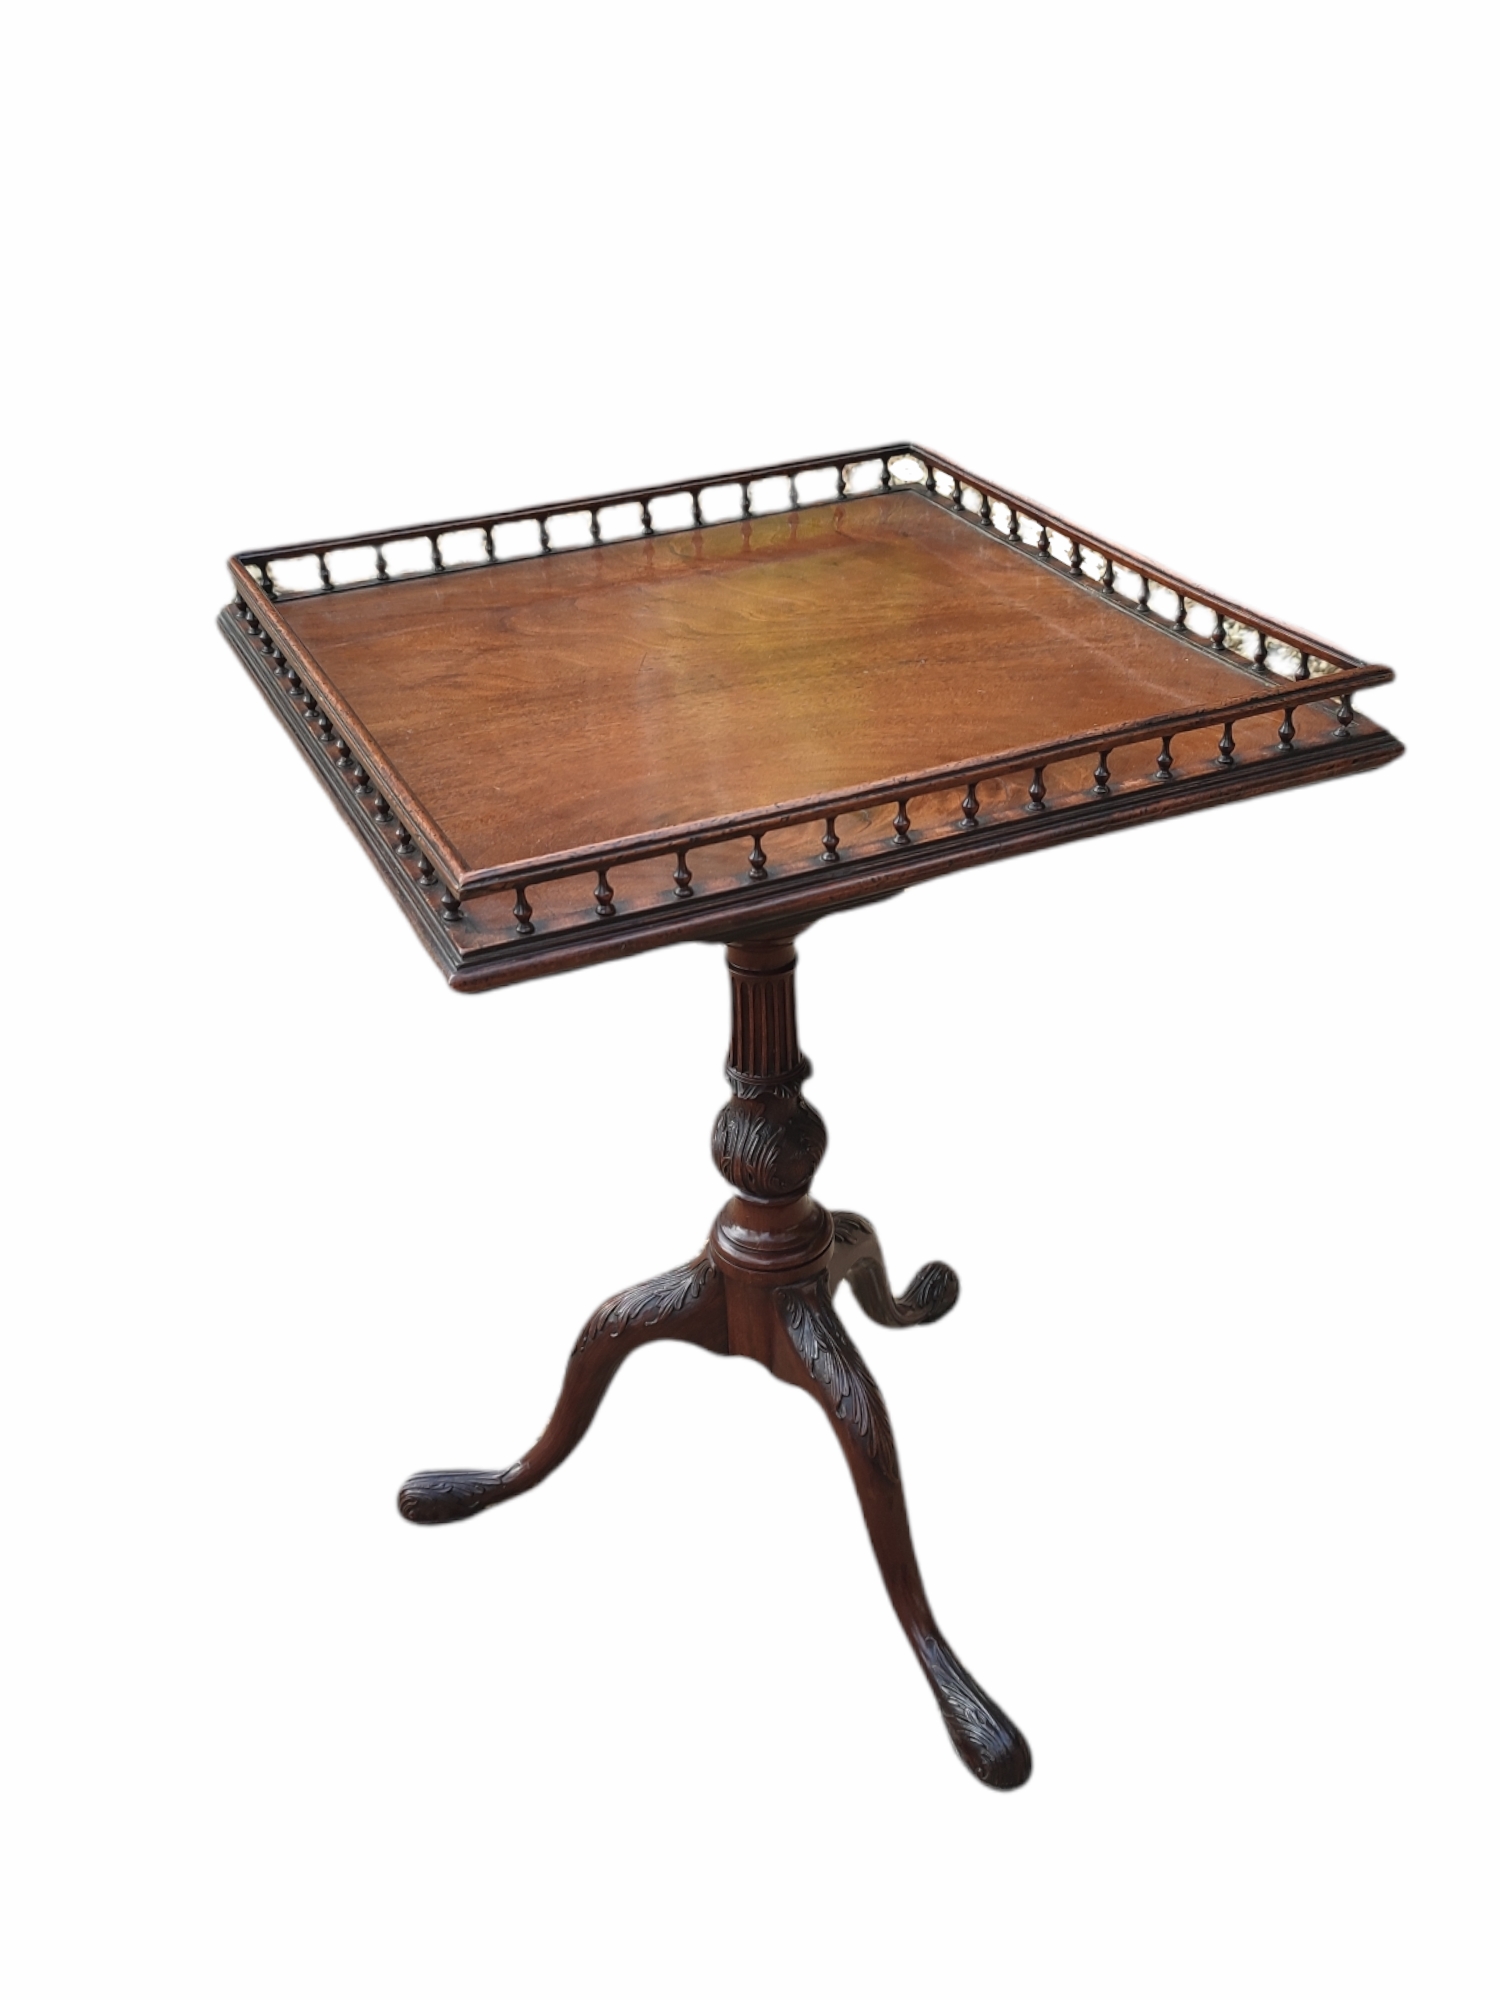 AN 18TH CENTURY MAHOGANY TILT TOP TRIPOD TABLE With square spindles galleried top above a bird cage,